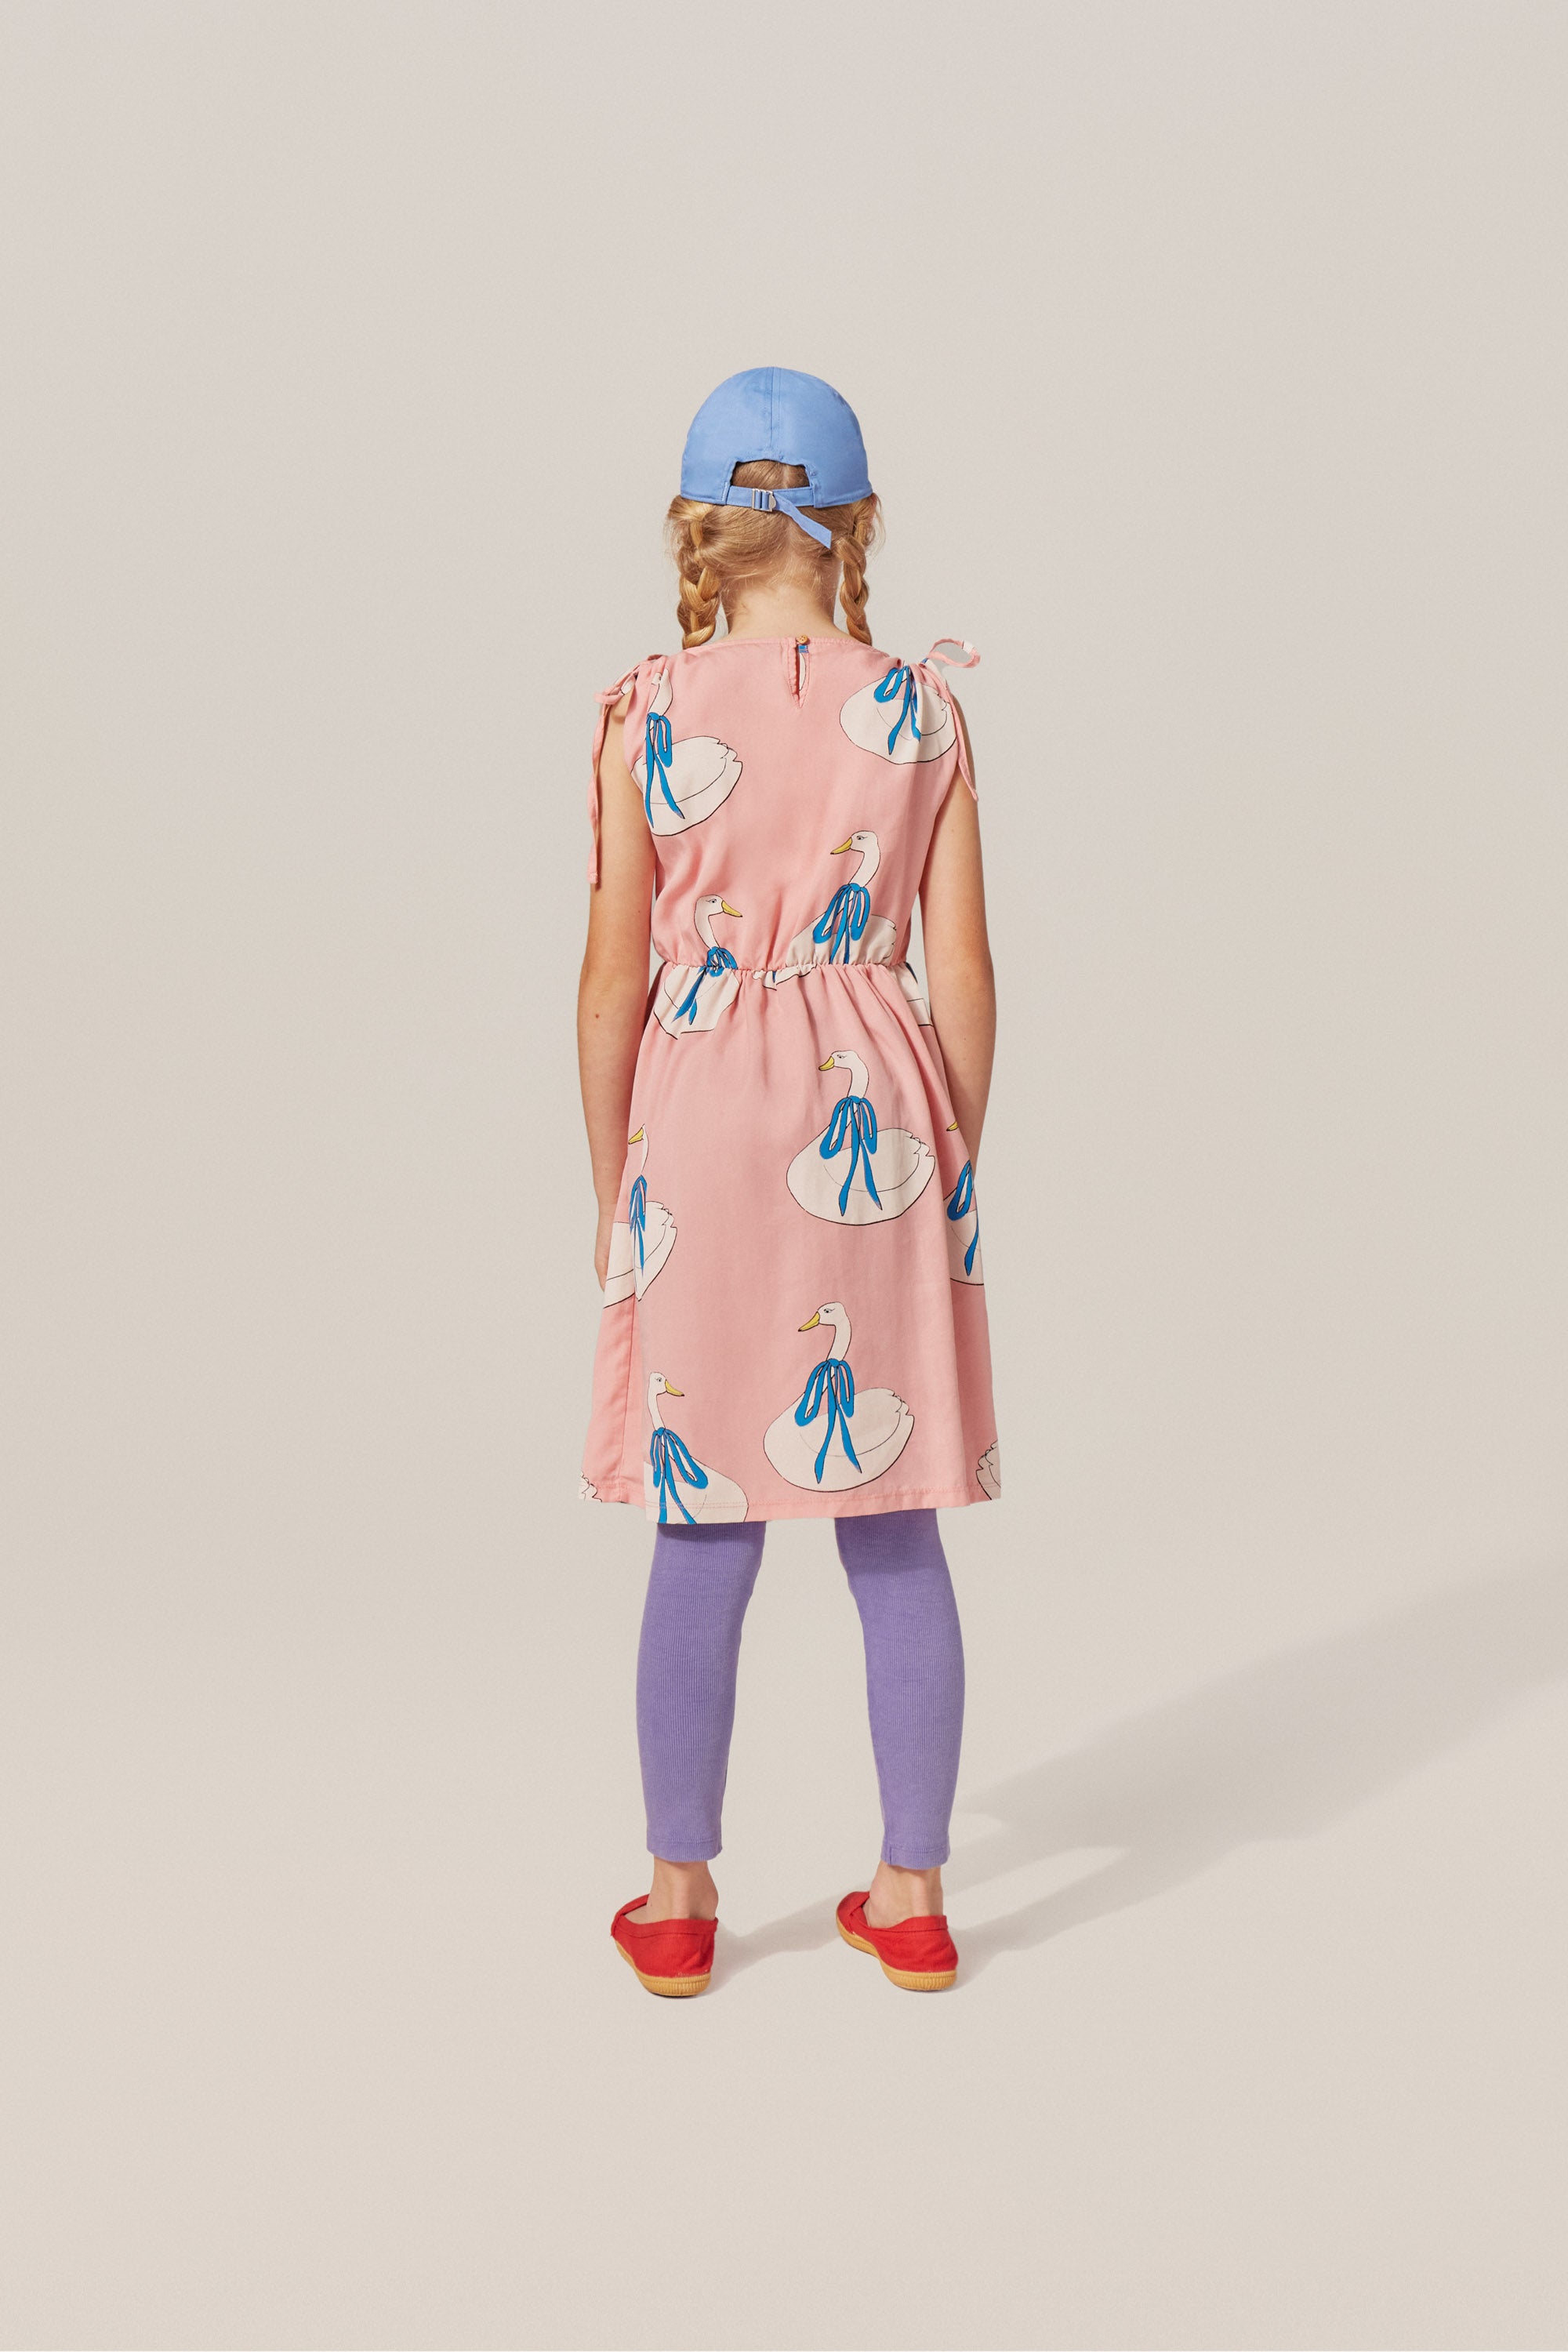 The Campamento - swans allover kids dress - pink